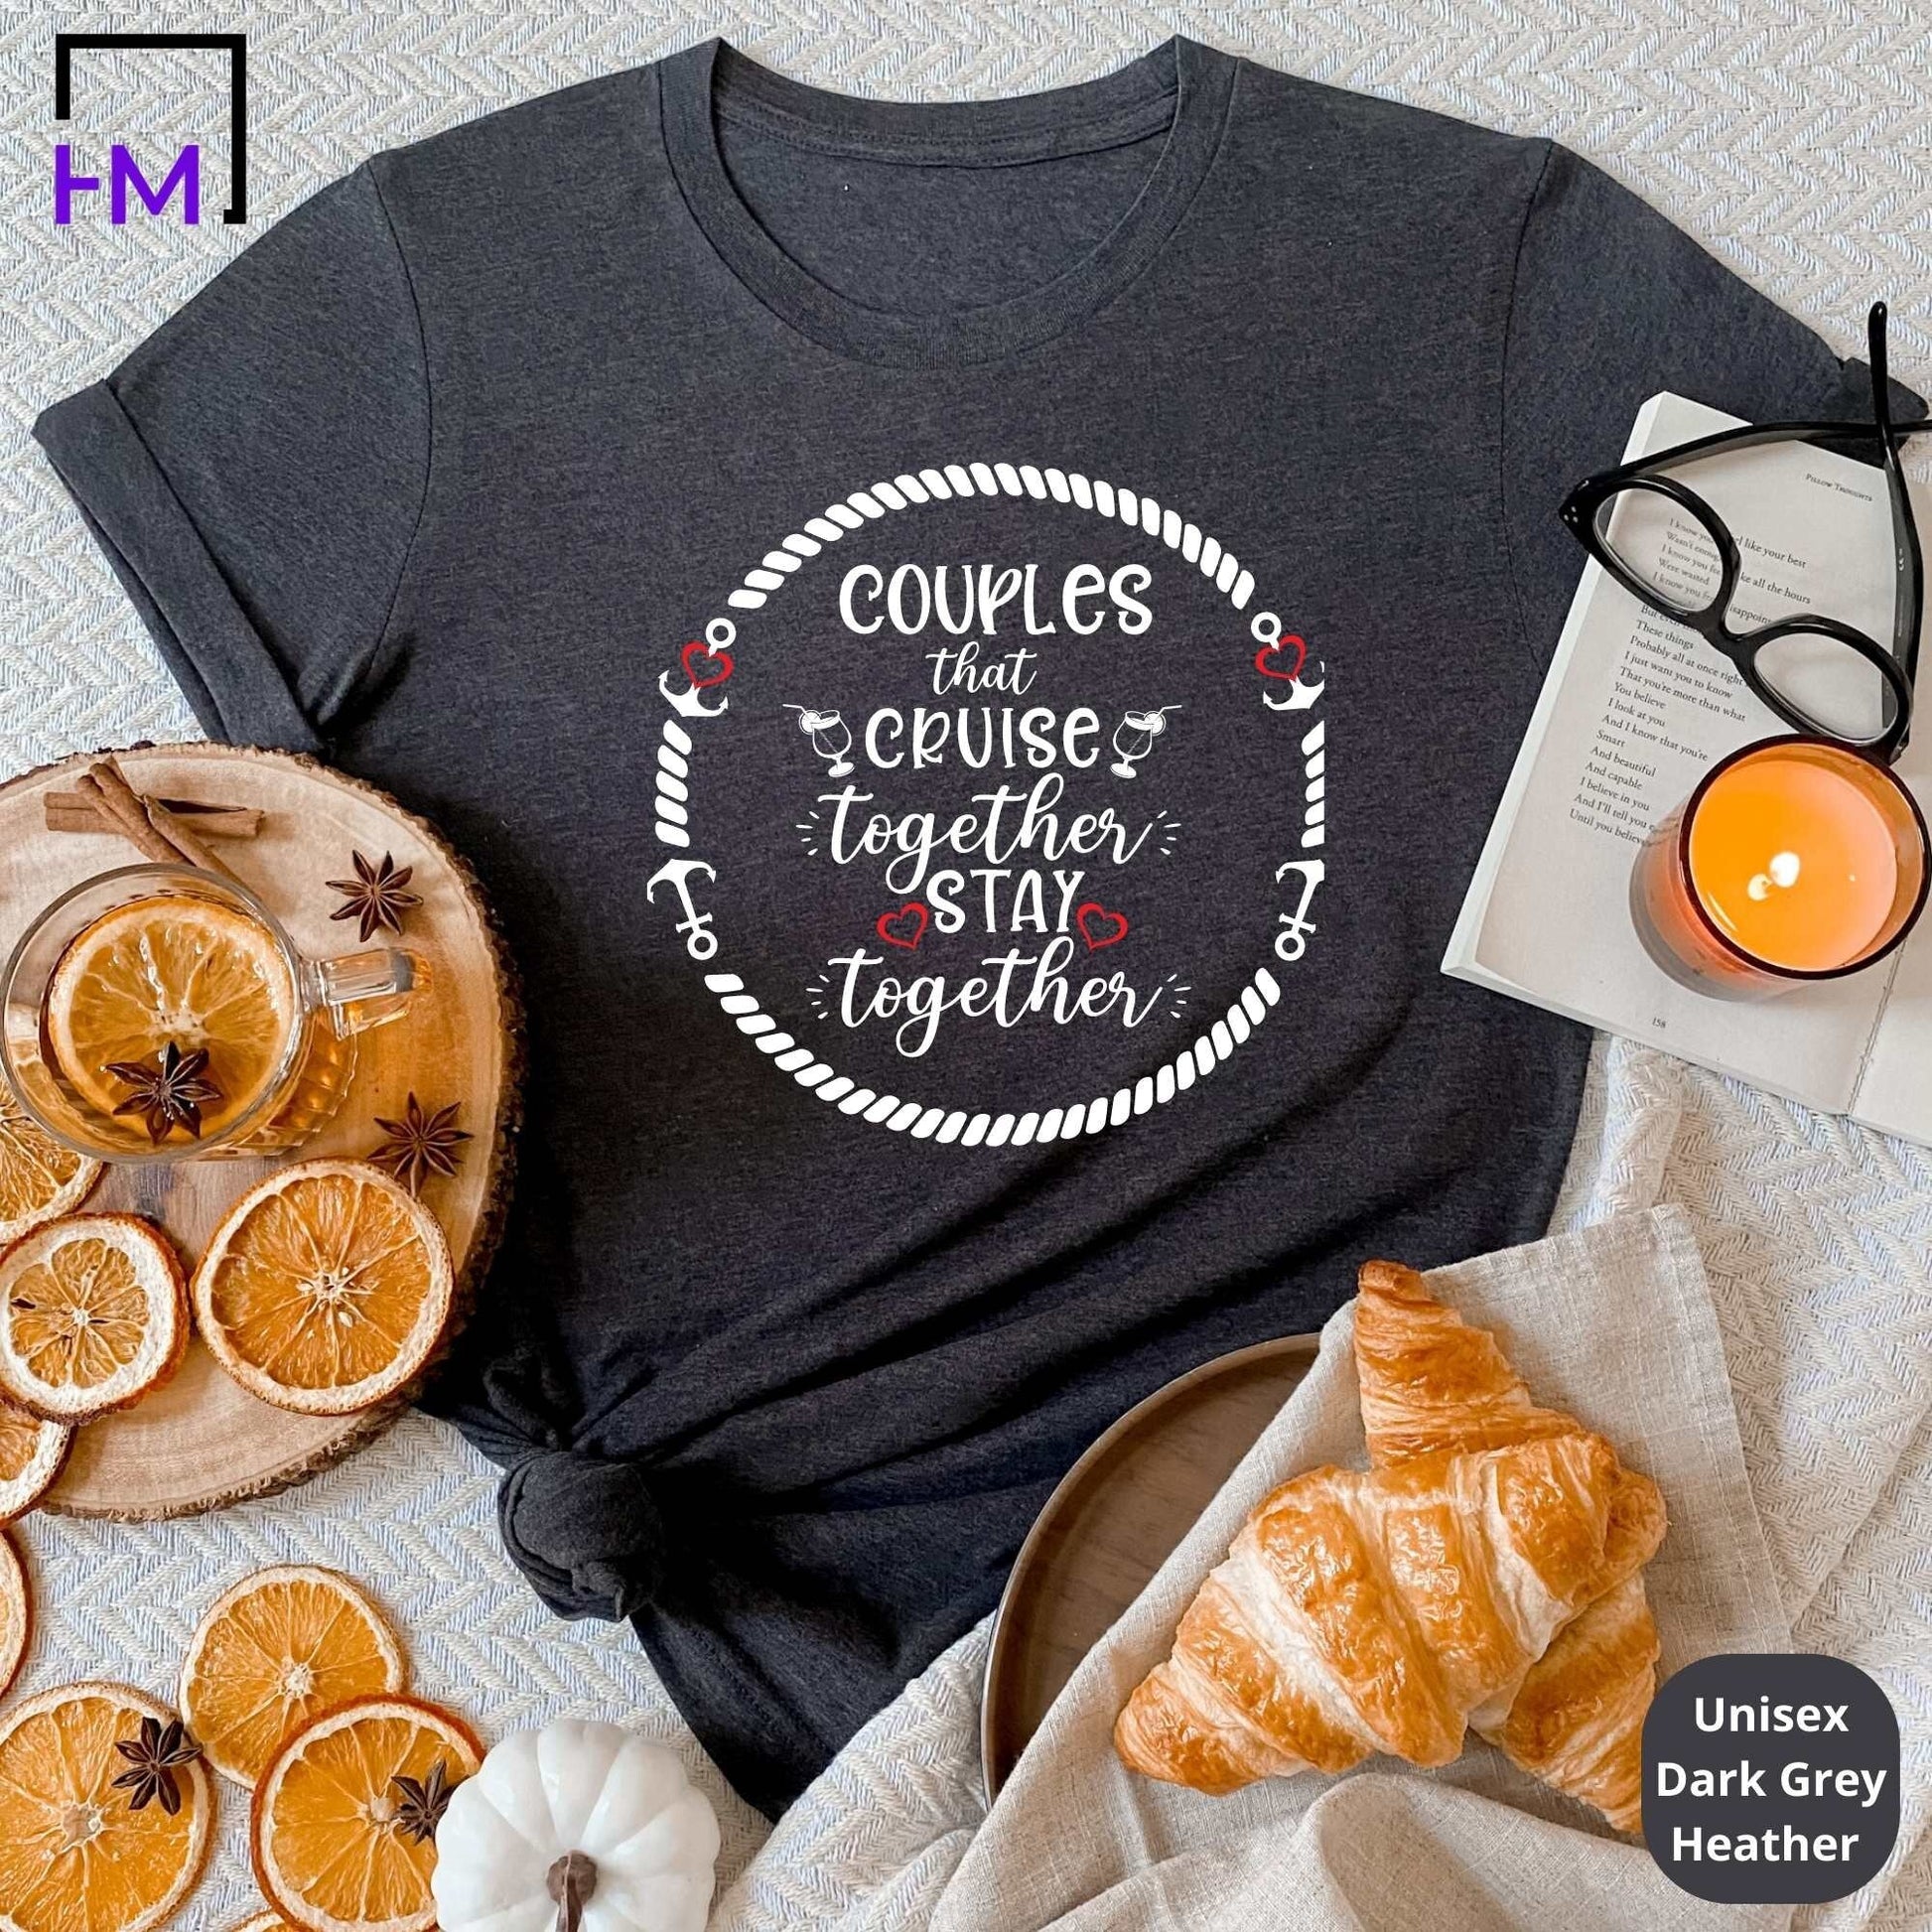 Couples Cruise Shirts for Family Vacations